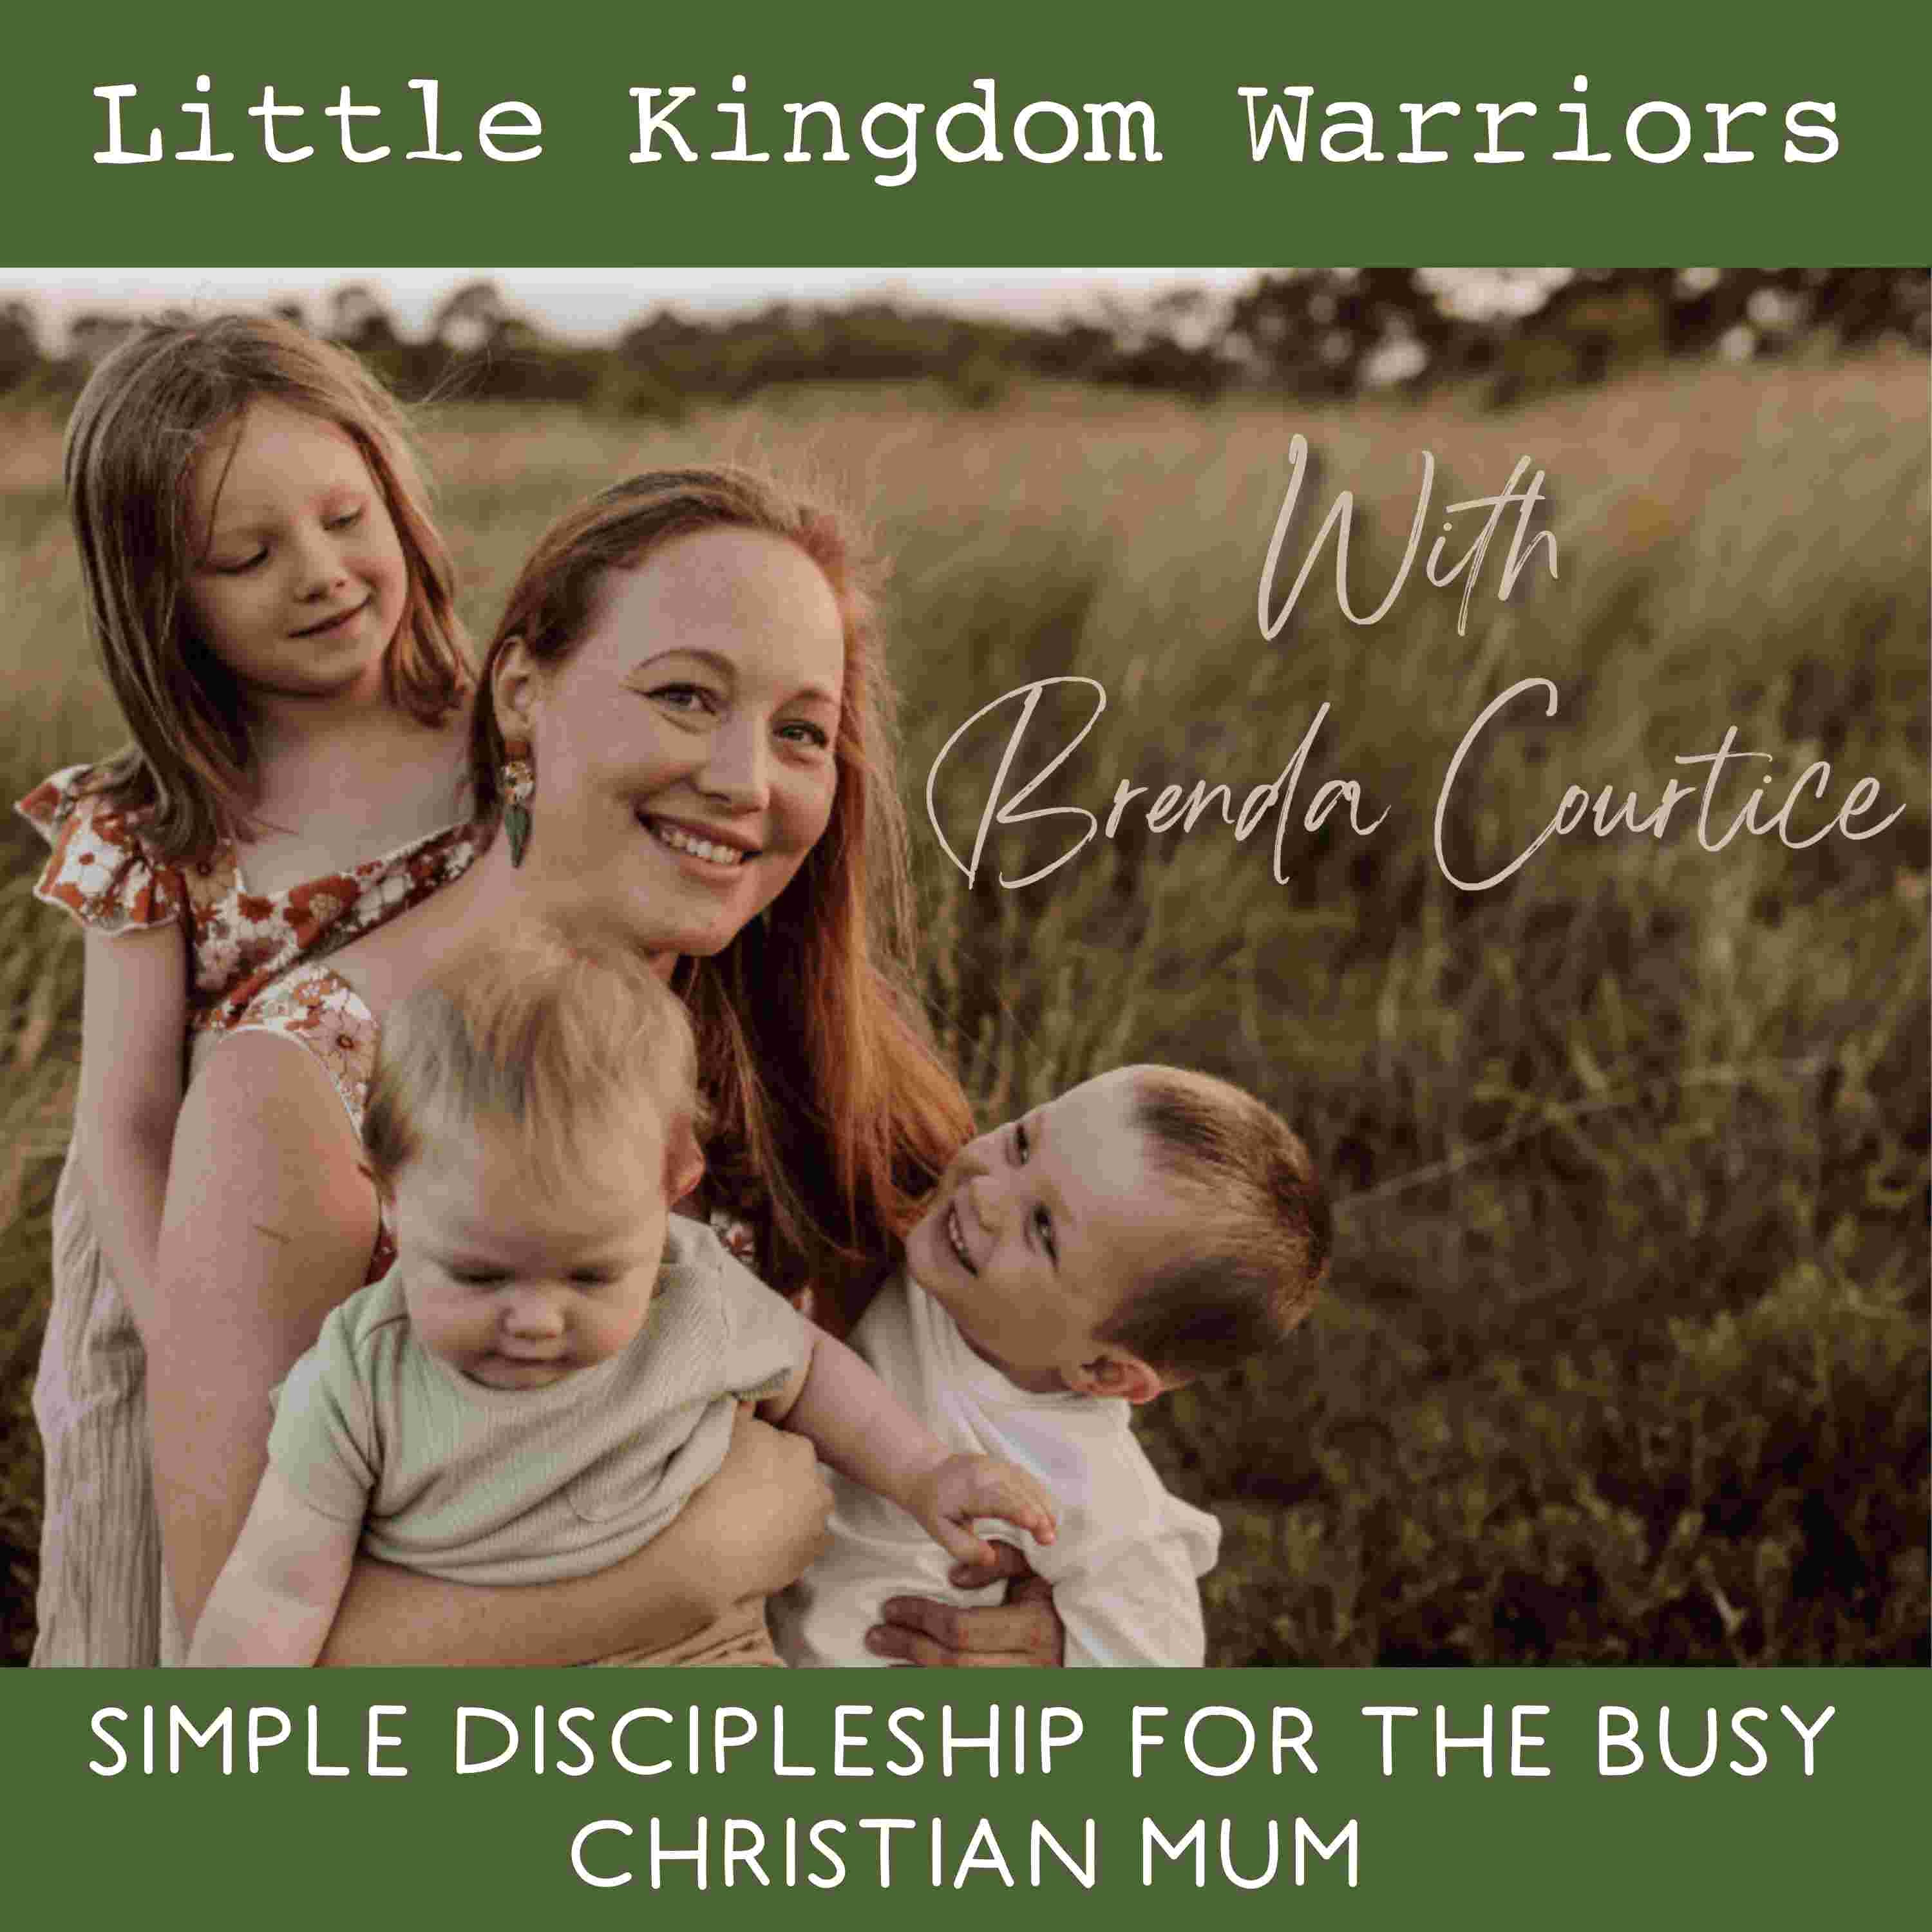 Little Kingdom Warriors - Practical daily routines for Christian families, simple daily rhythms for Christian kids, Discipling kids